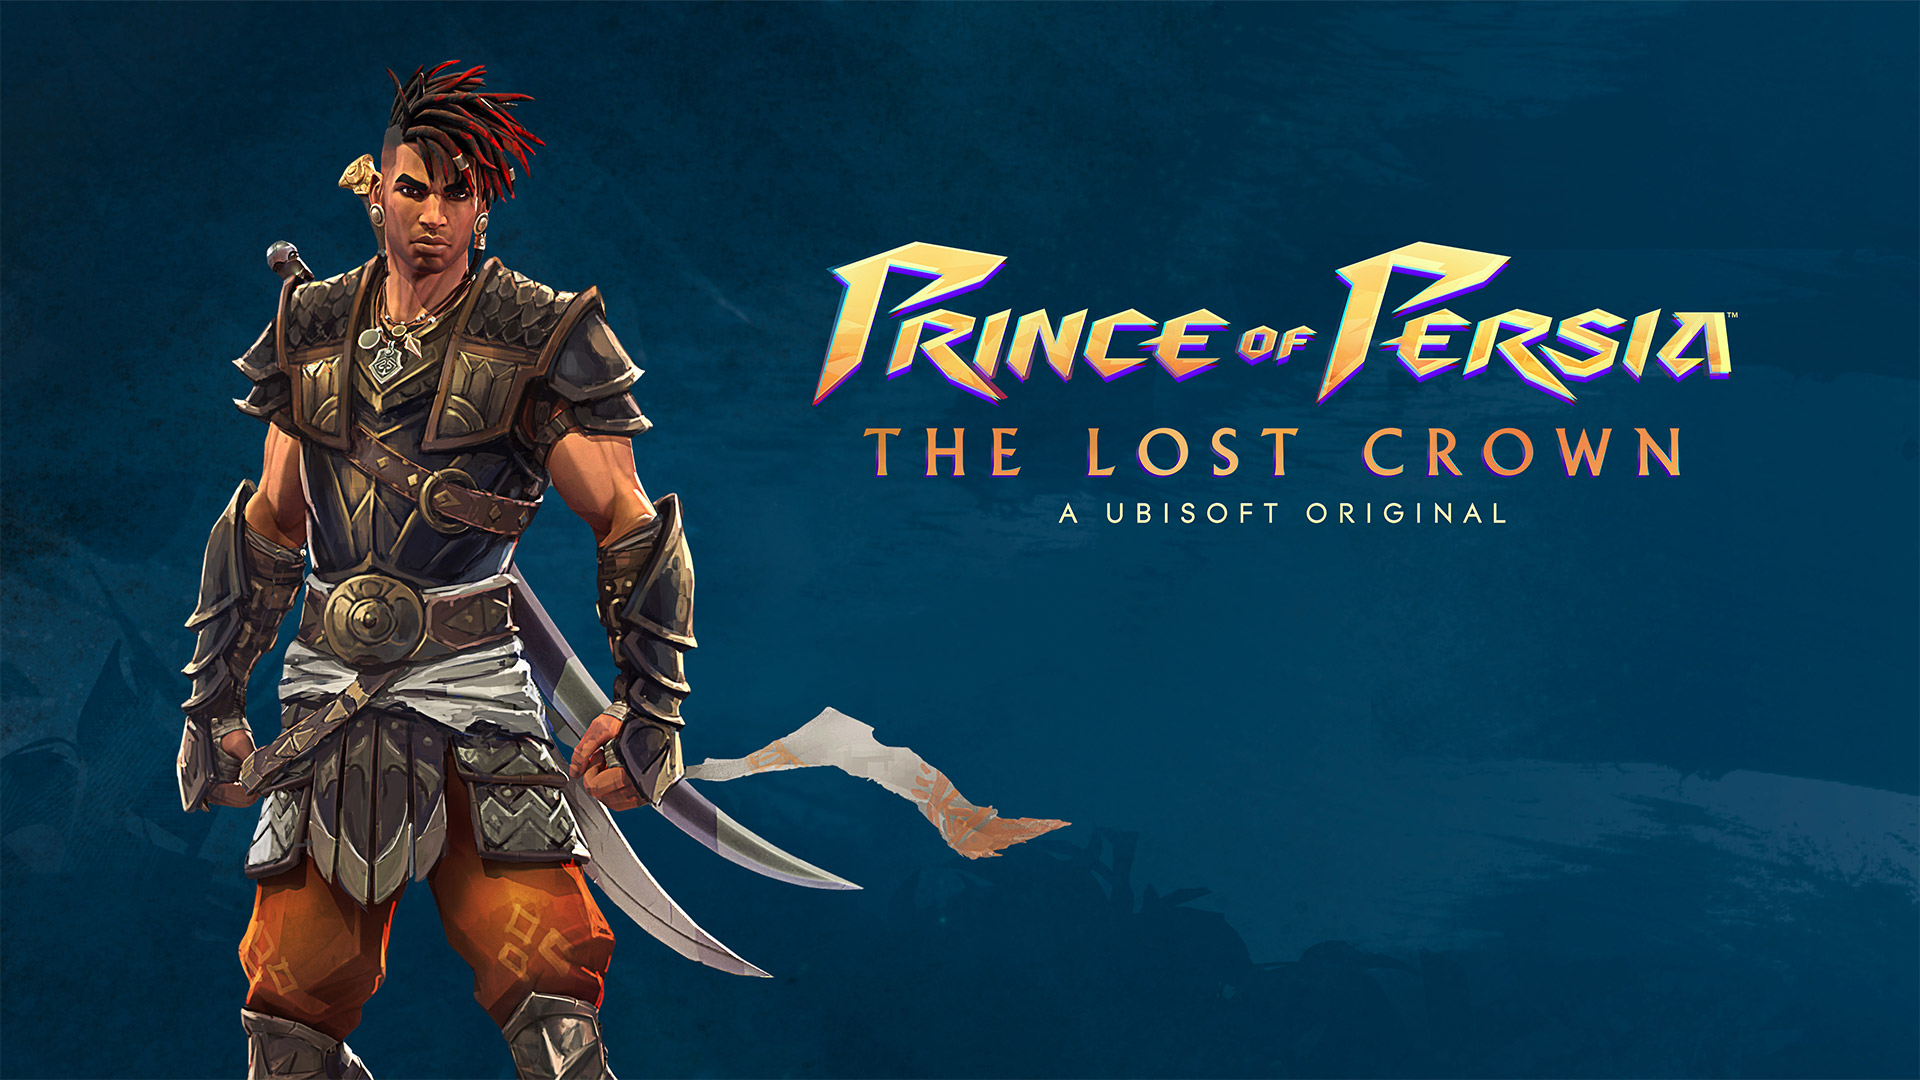 Prince of Persia The Lost Crown - Nintendo Switch [Digital